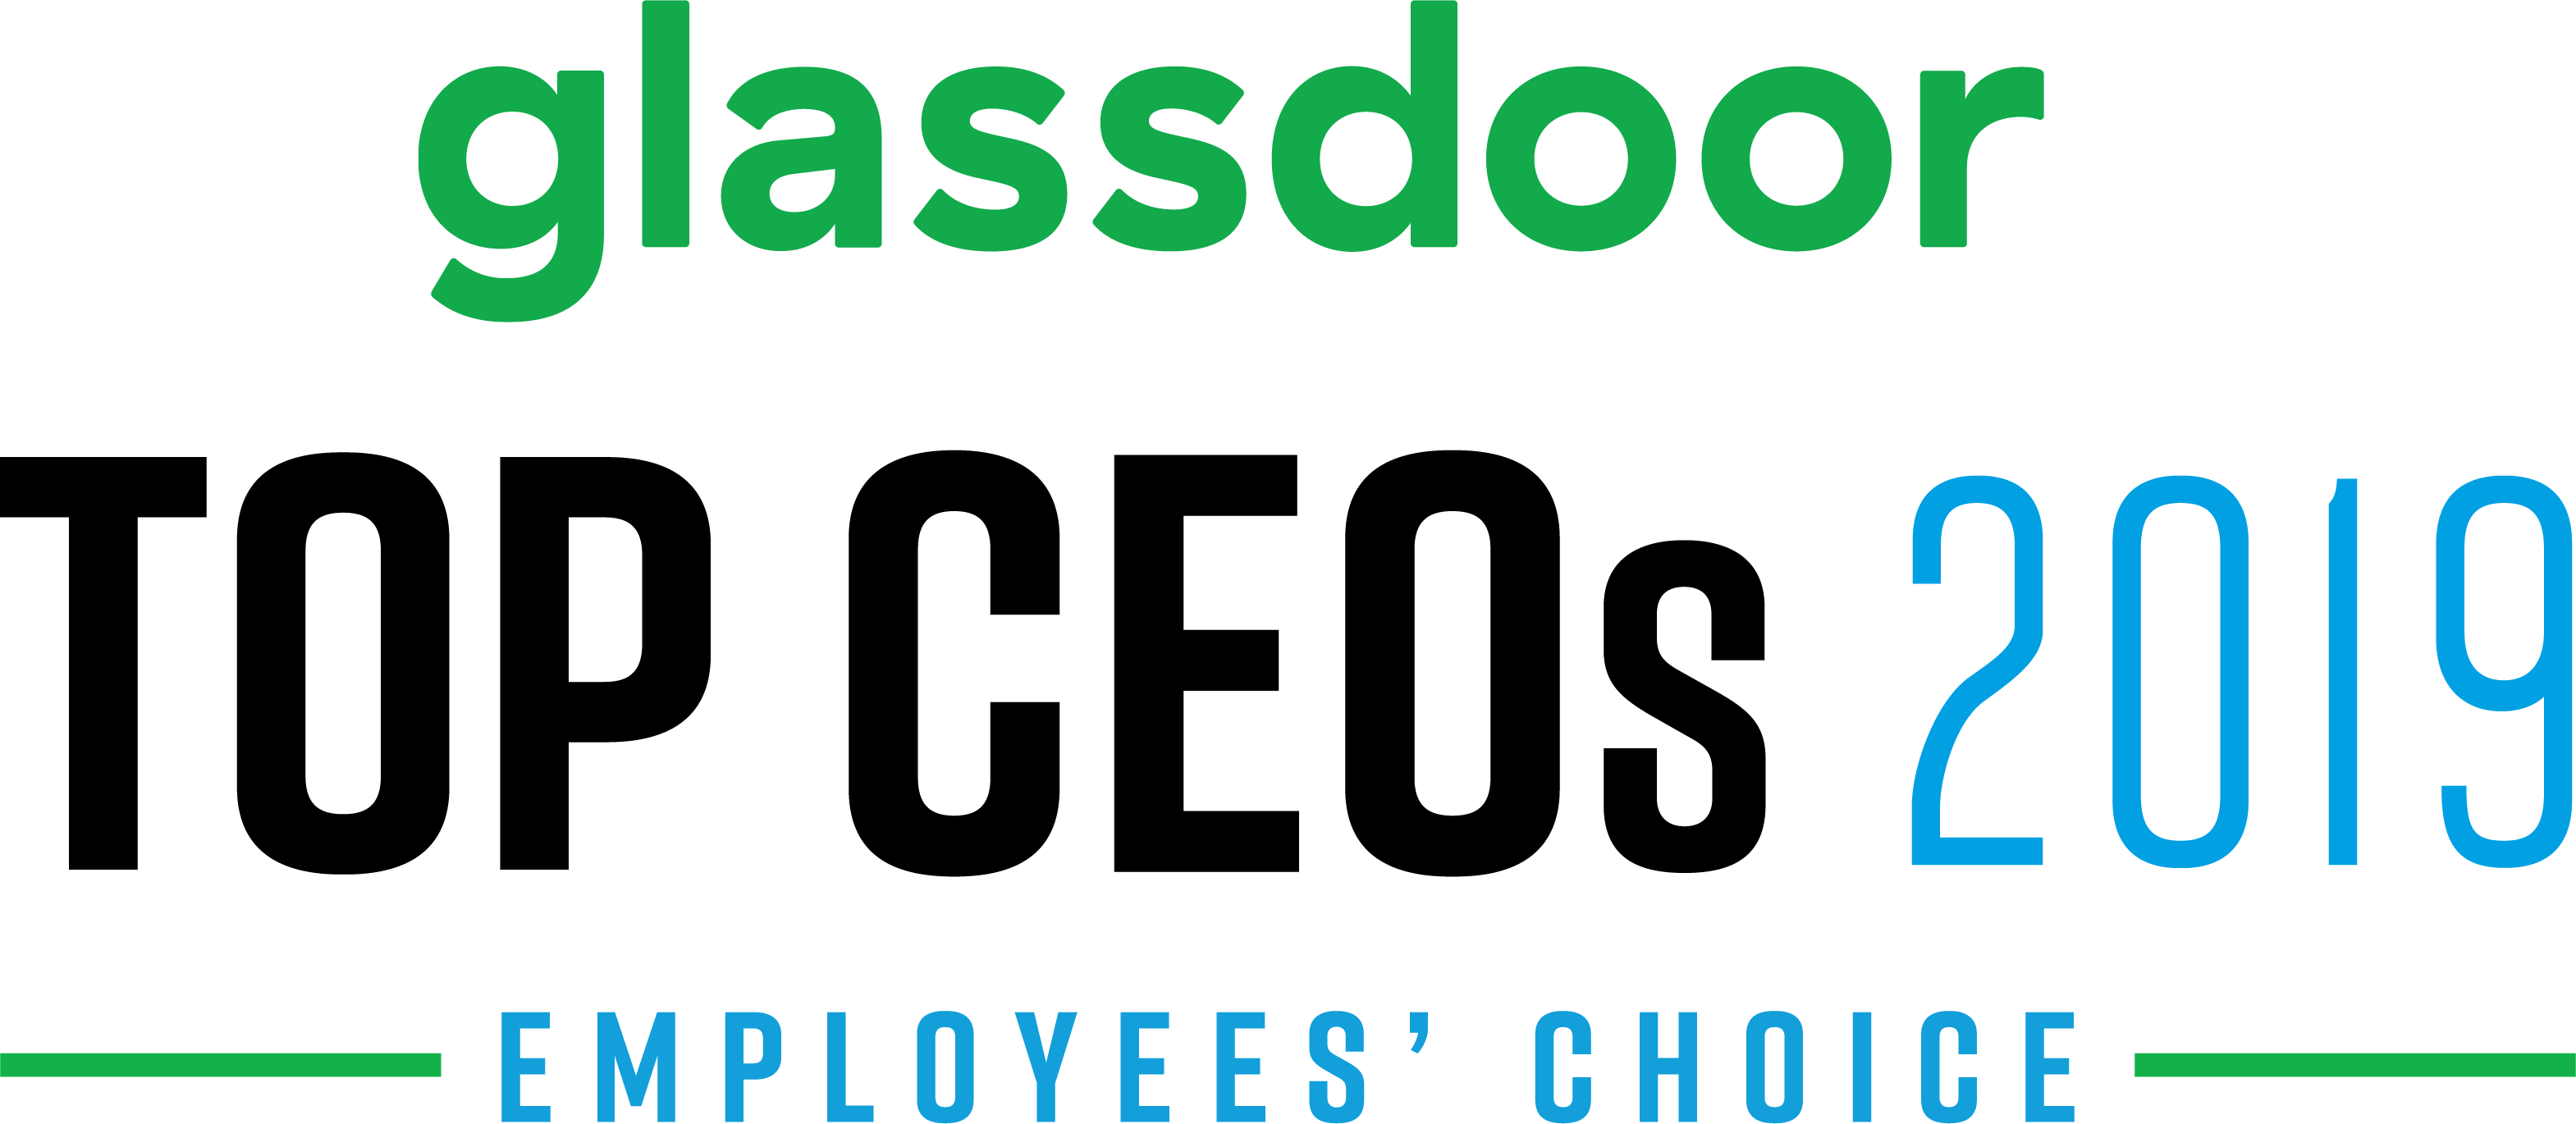 KnowBe4 CEO Stu Sjouwerman Named a Glassdoor Top CEO for 2019